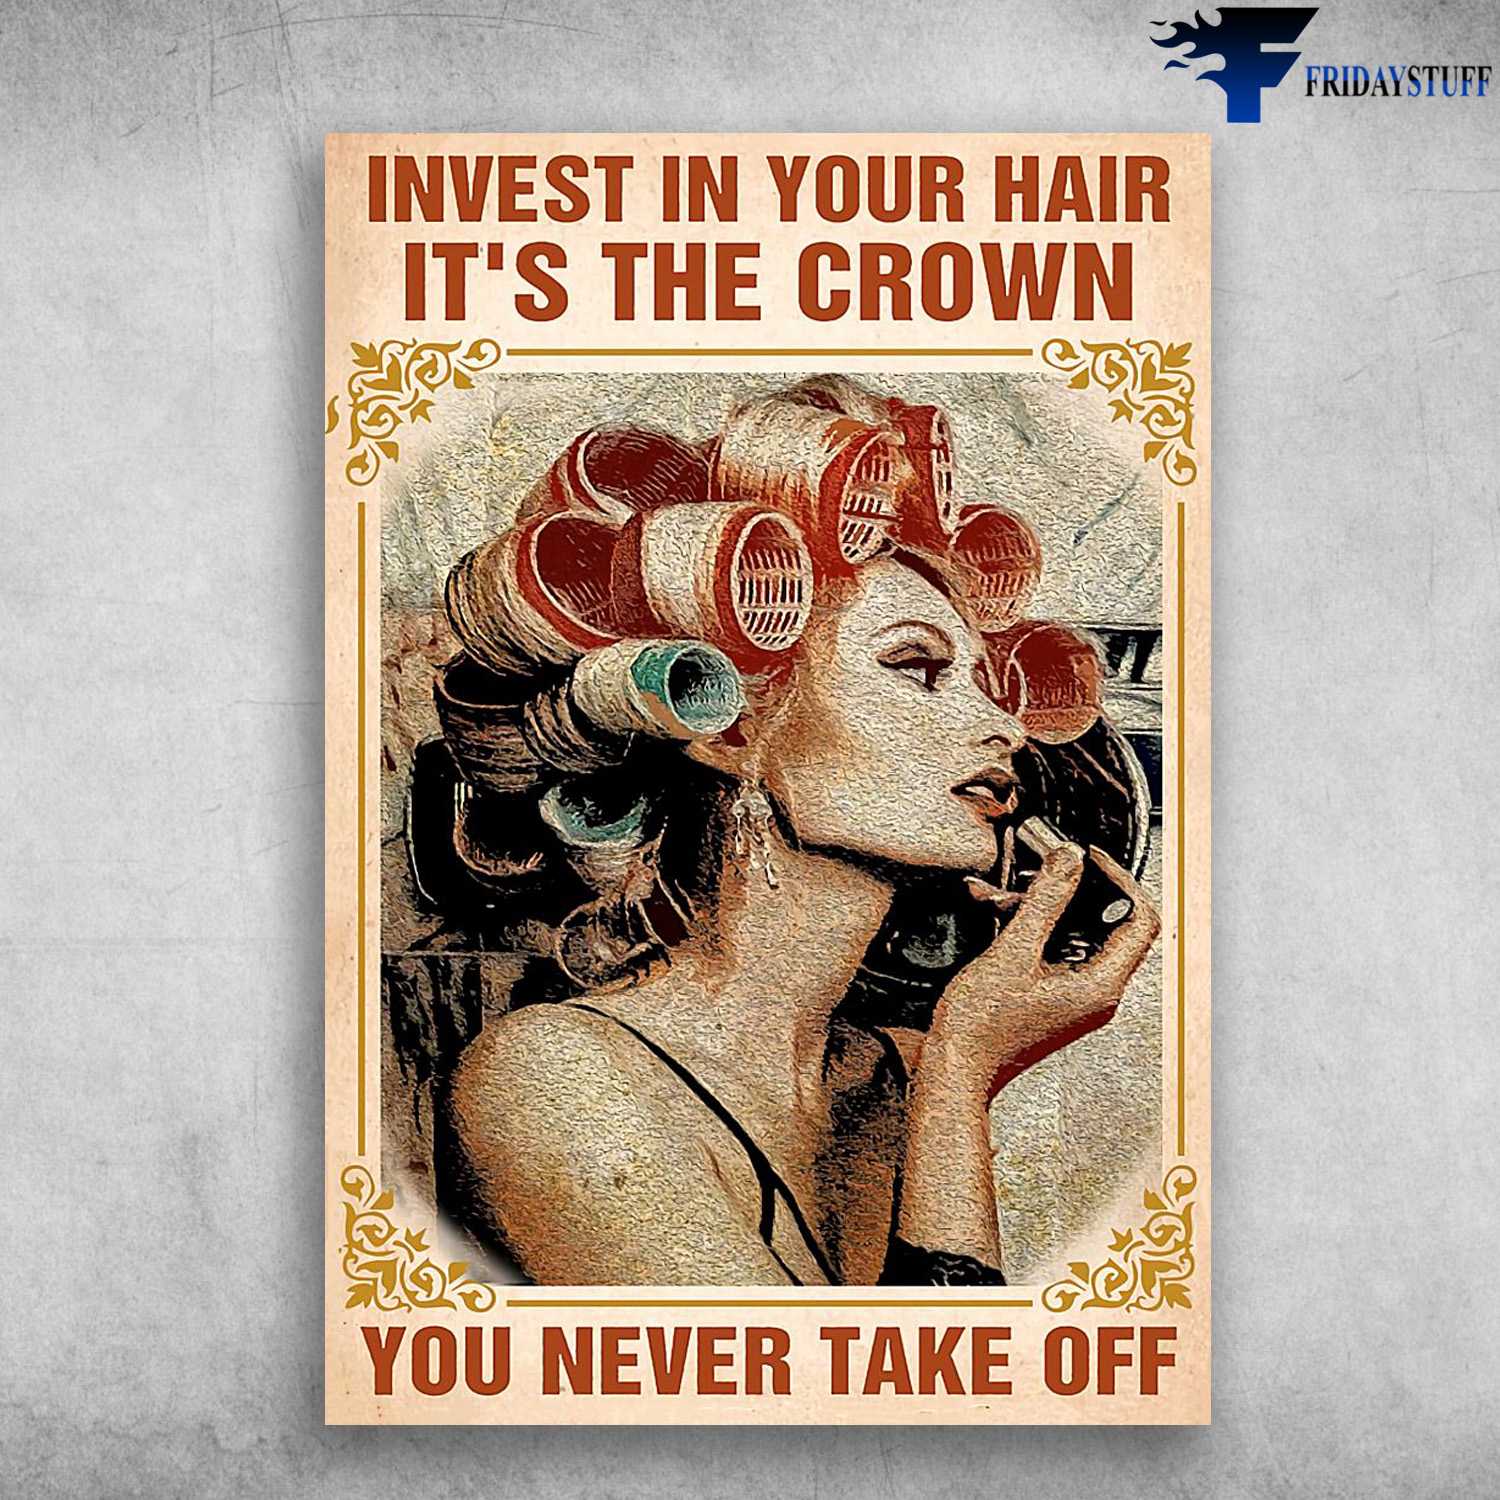 Hairdresser Poster, Hair Salon, Invest In Your Hair, It's The Crown, You Never Take Off